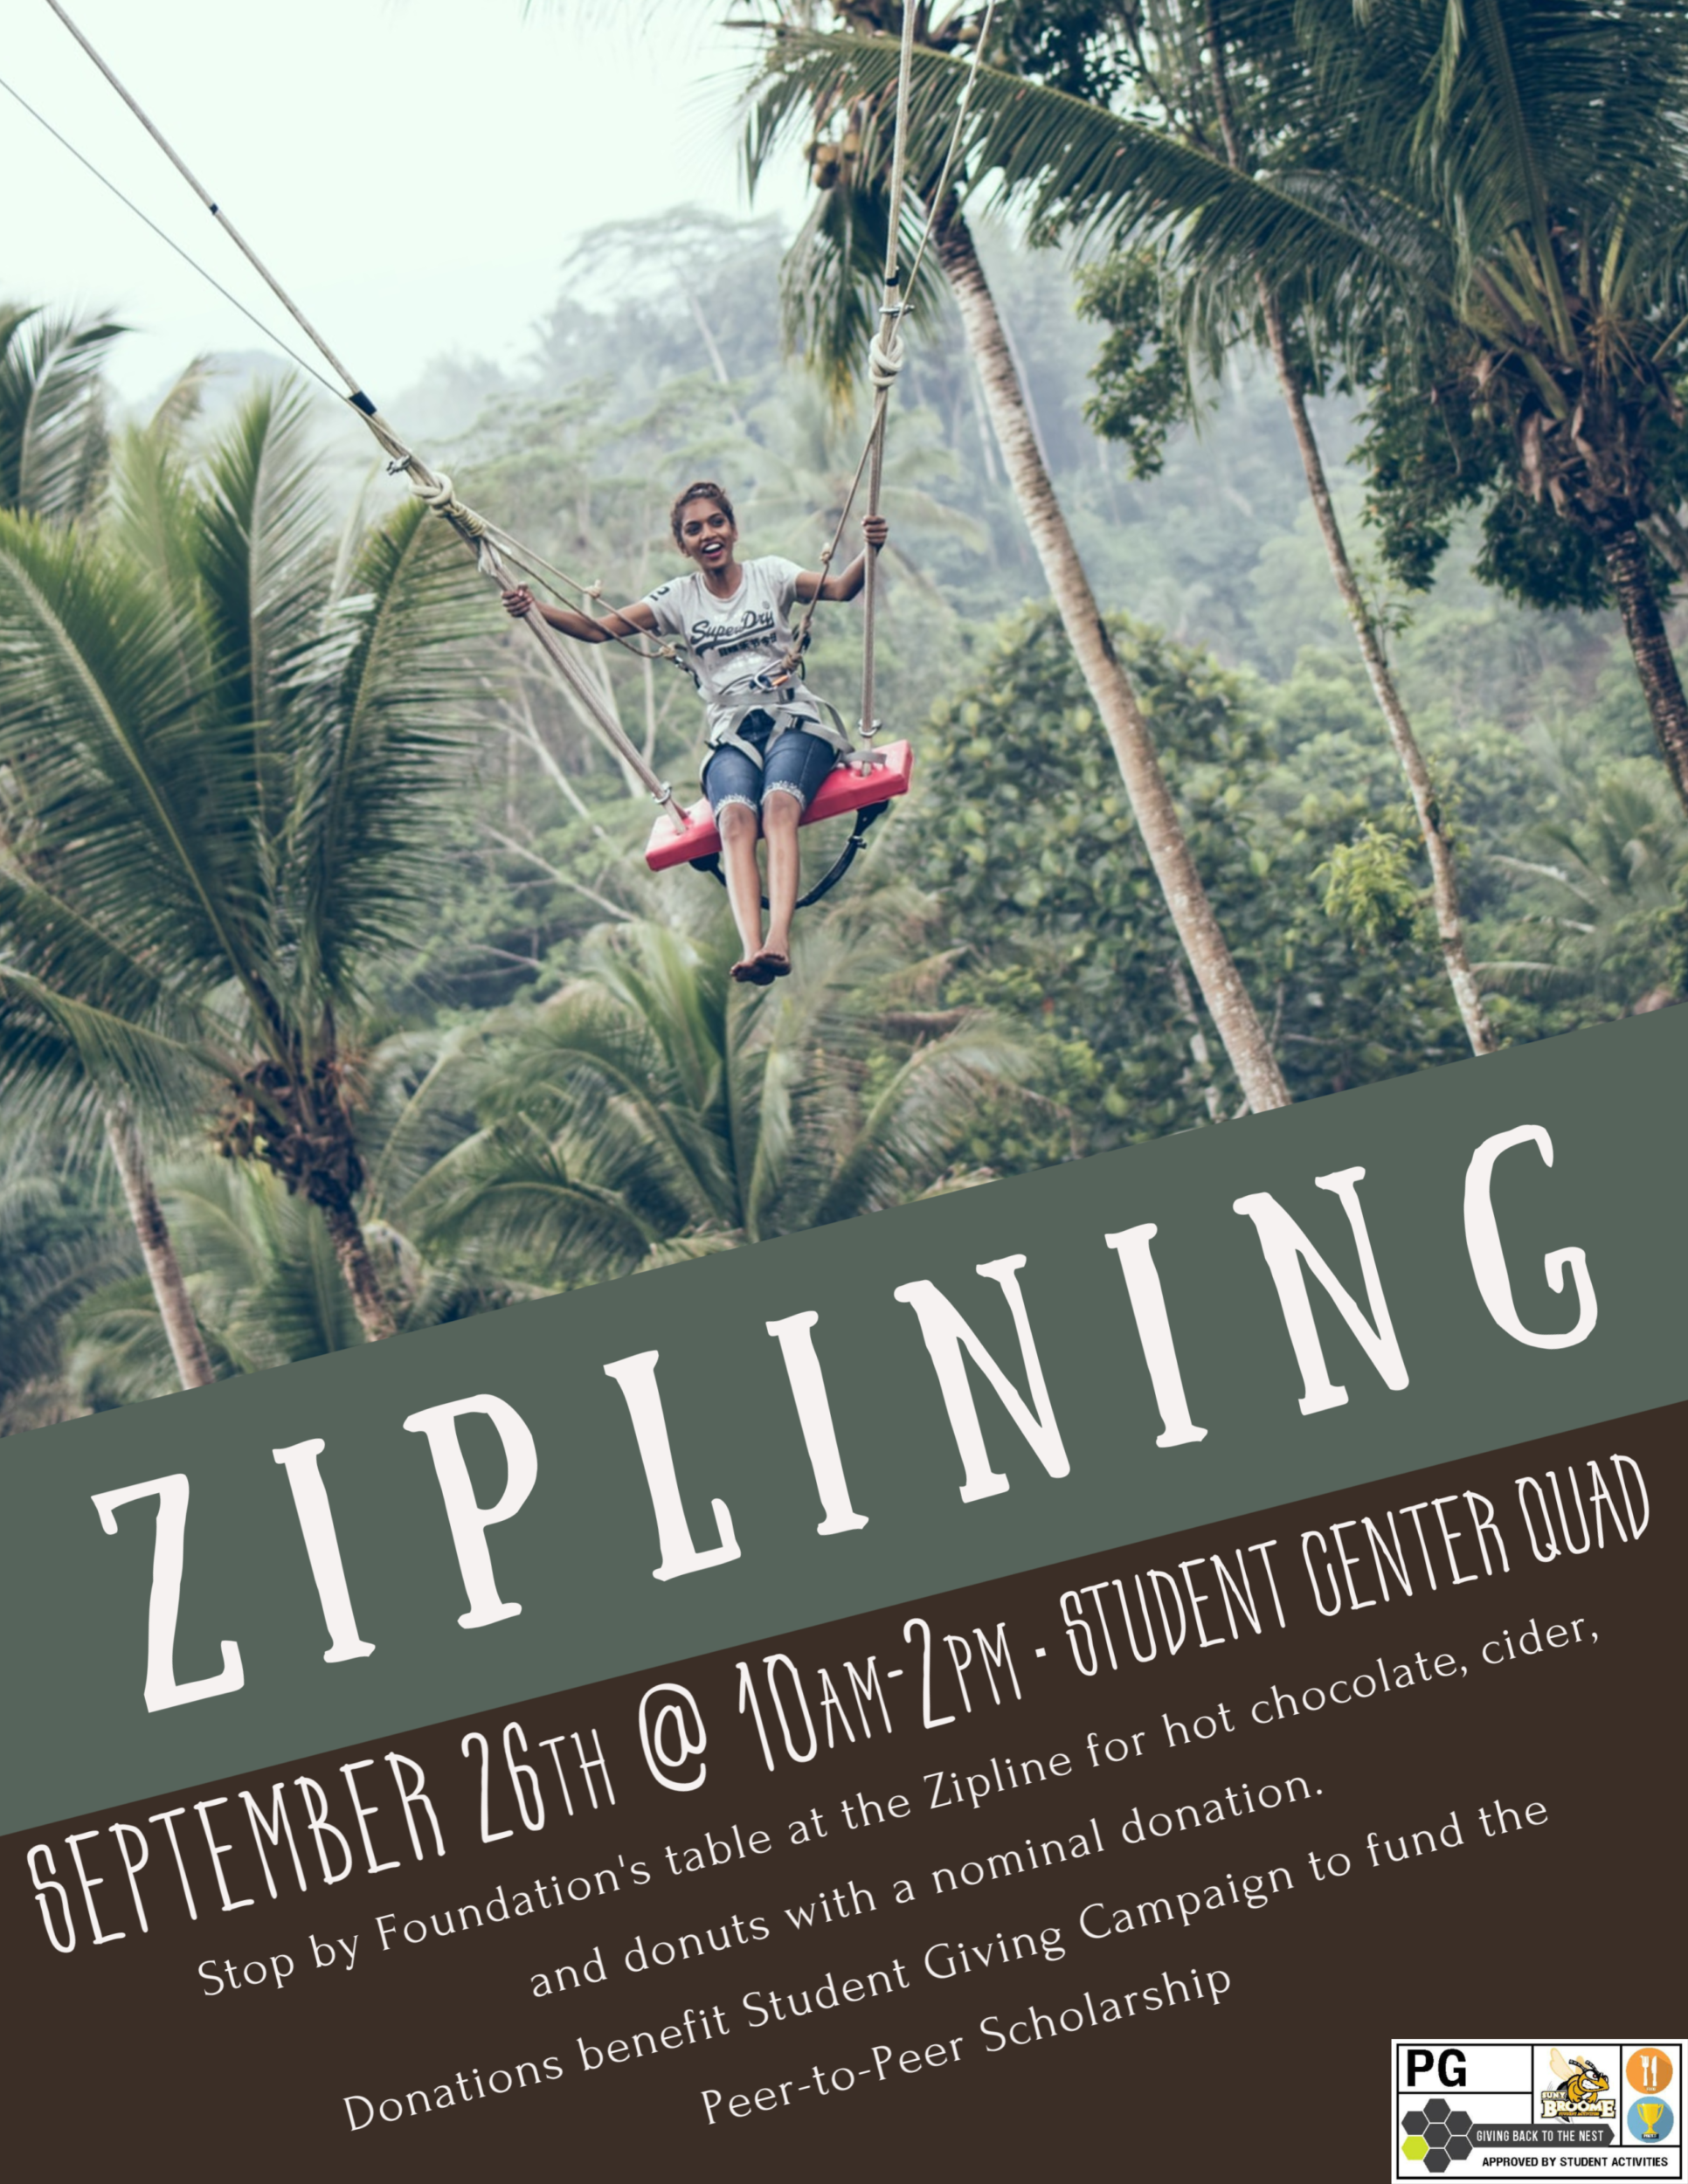  Join Student Activities for a ziplining event from 10 a.m. to 2 p.m. Sept. 26 on the Quad!